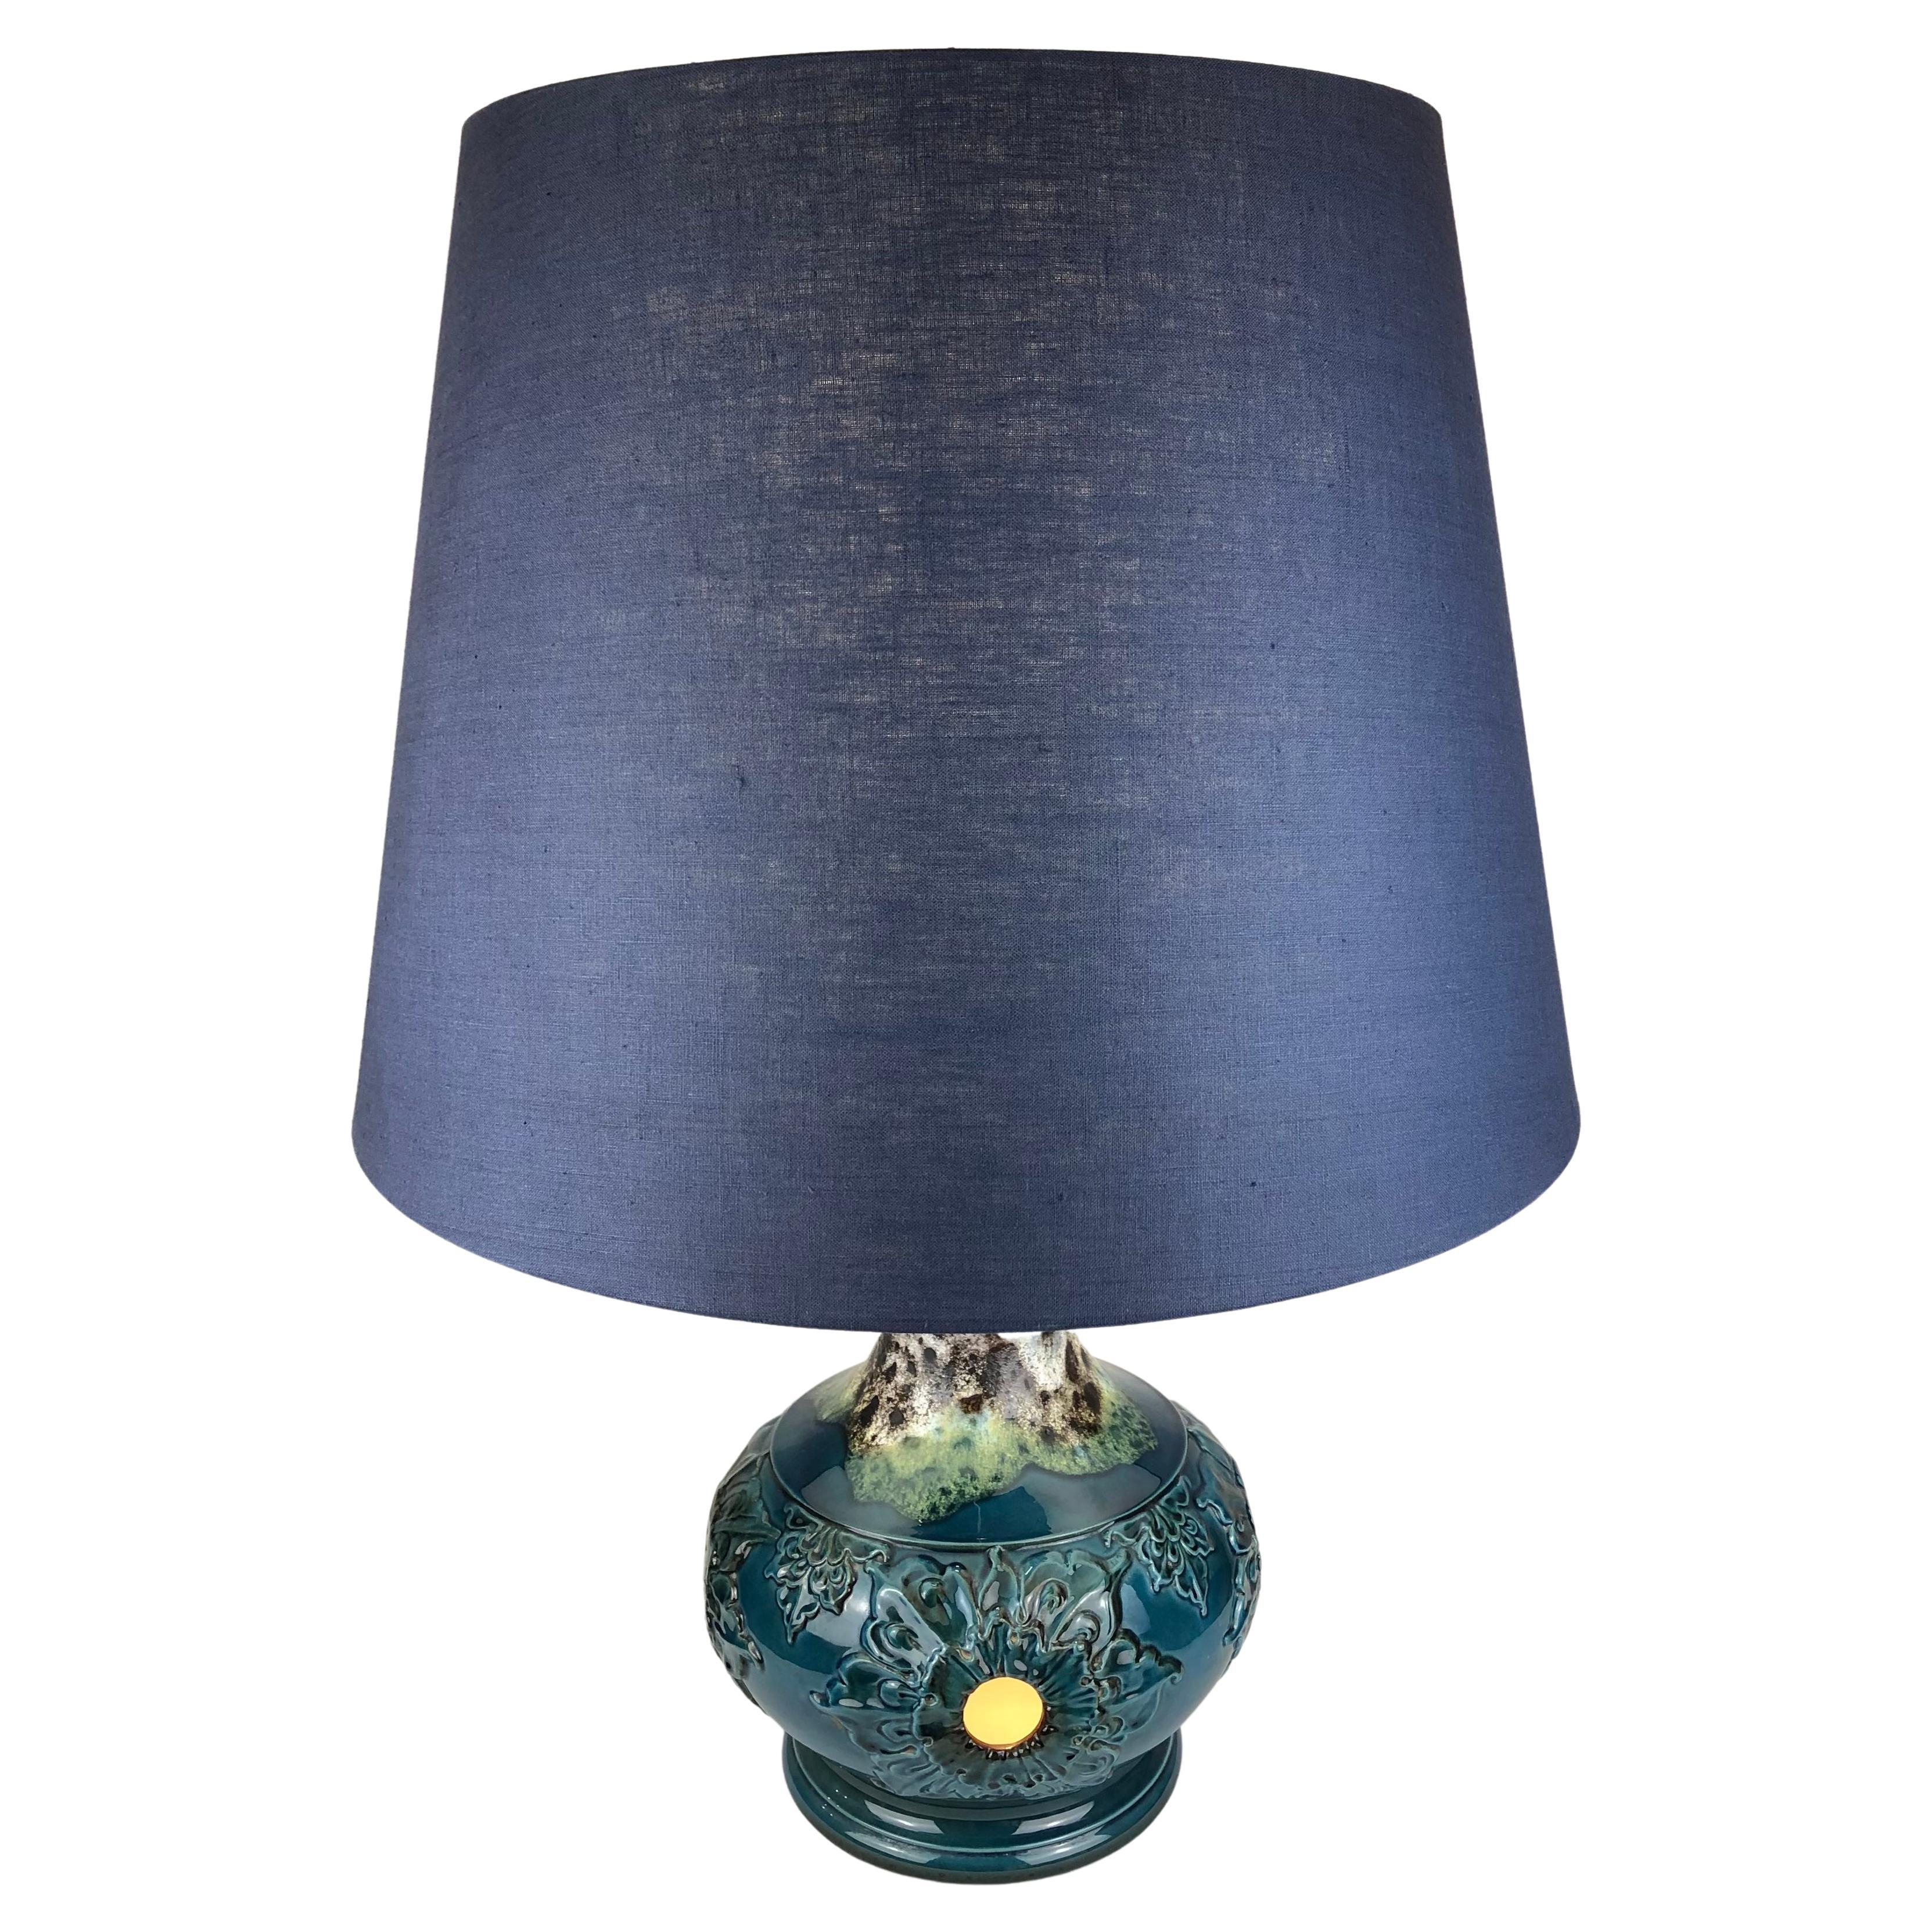 Large French Mid- 20th Century Blue and Beige Glazed Ceramic Table Lamp